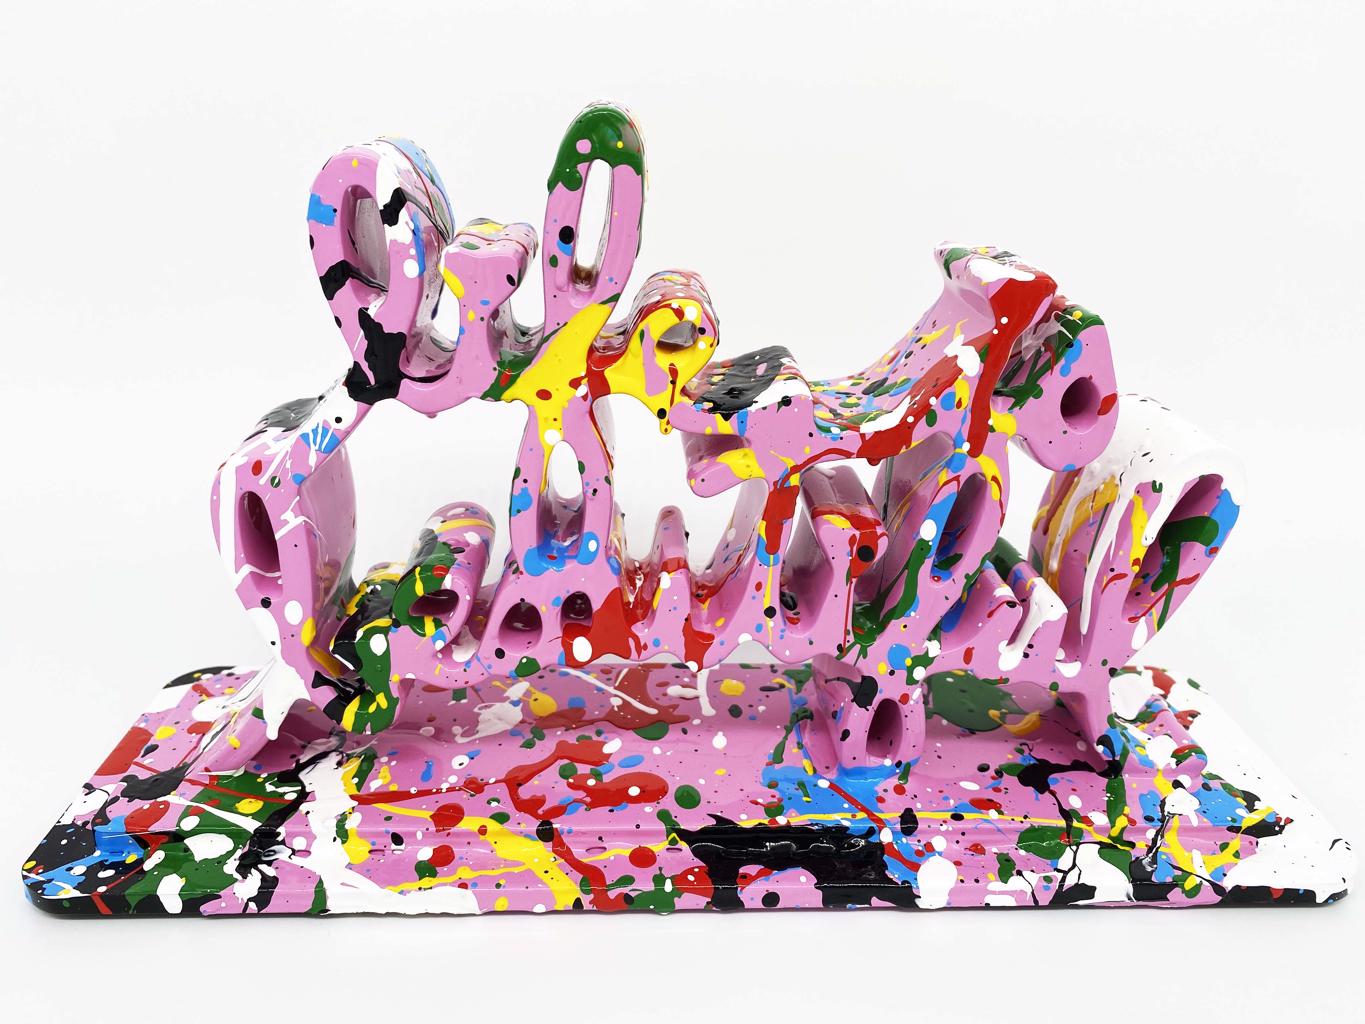 Mr. Brainwash, 'Life is Beautiful -Dipped Splash', 2020 | Pink | Available for Sale | Image of signed sculpture